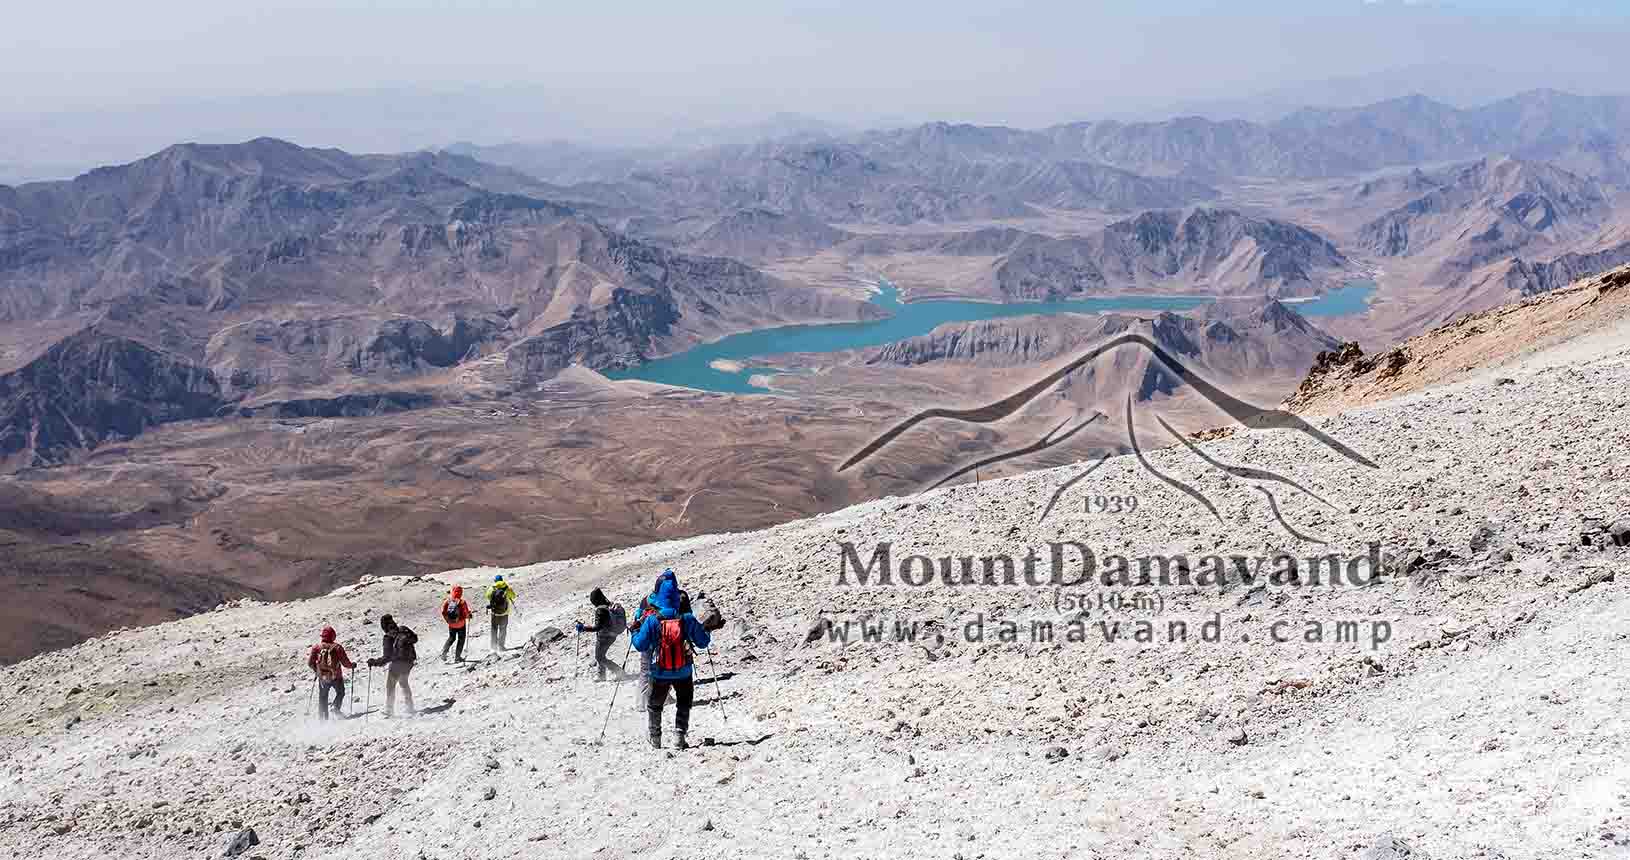 A downward view from the southern path of Damavand